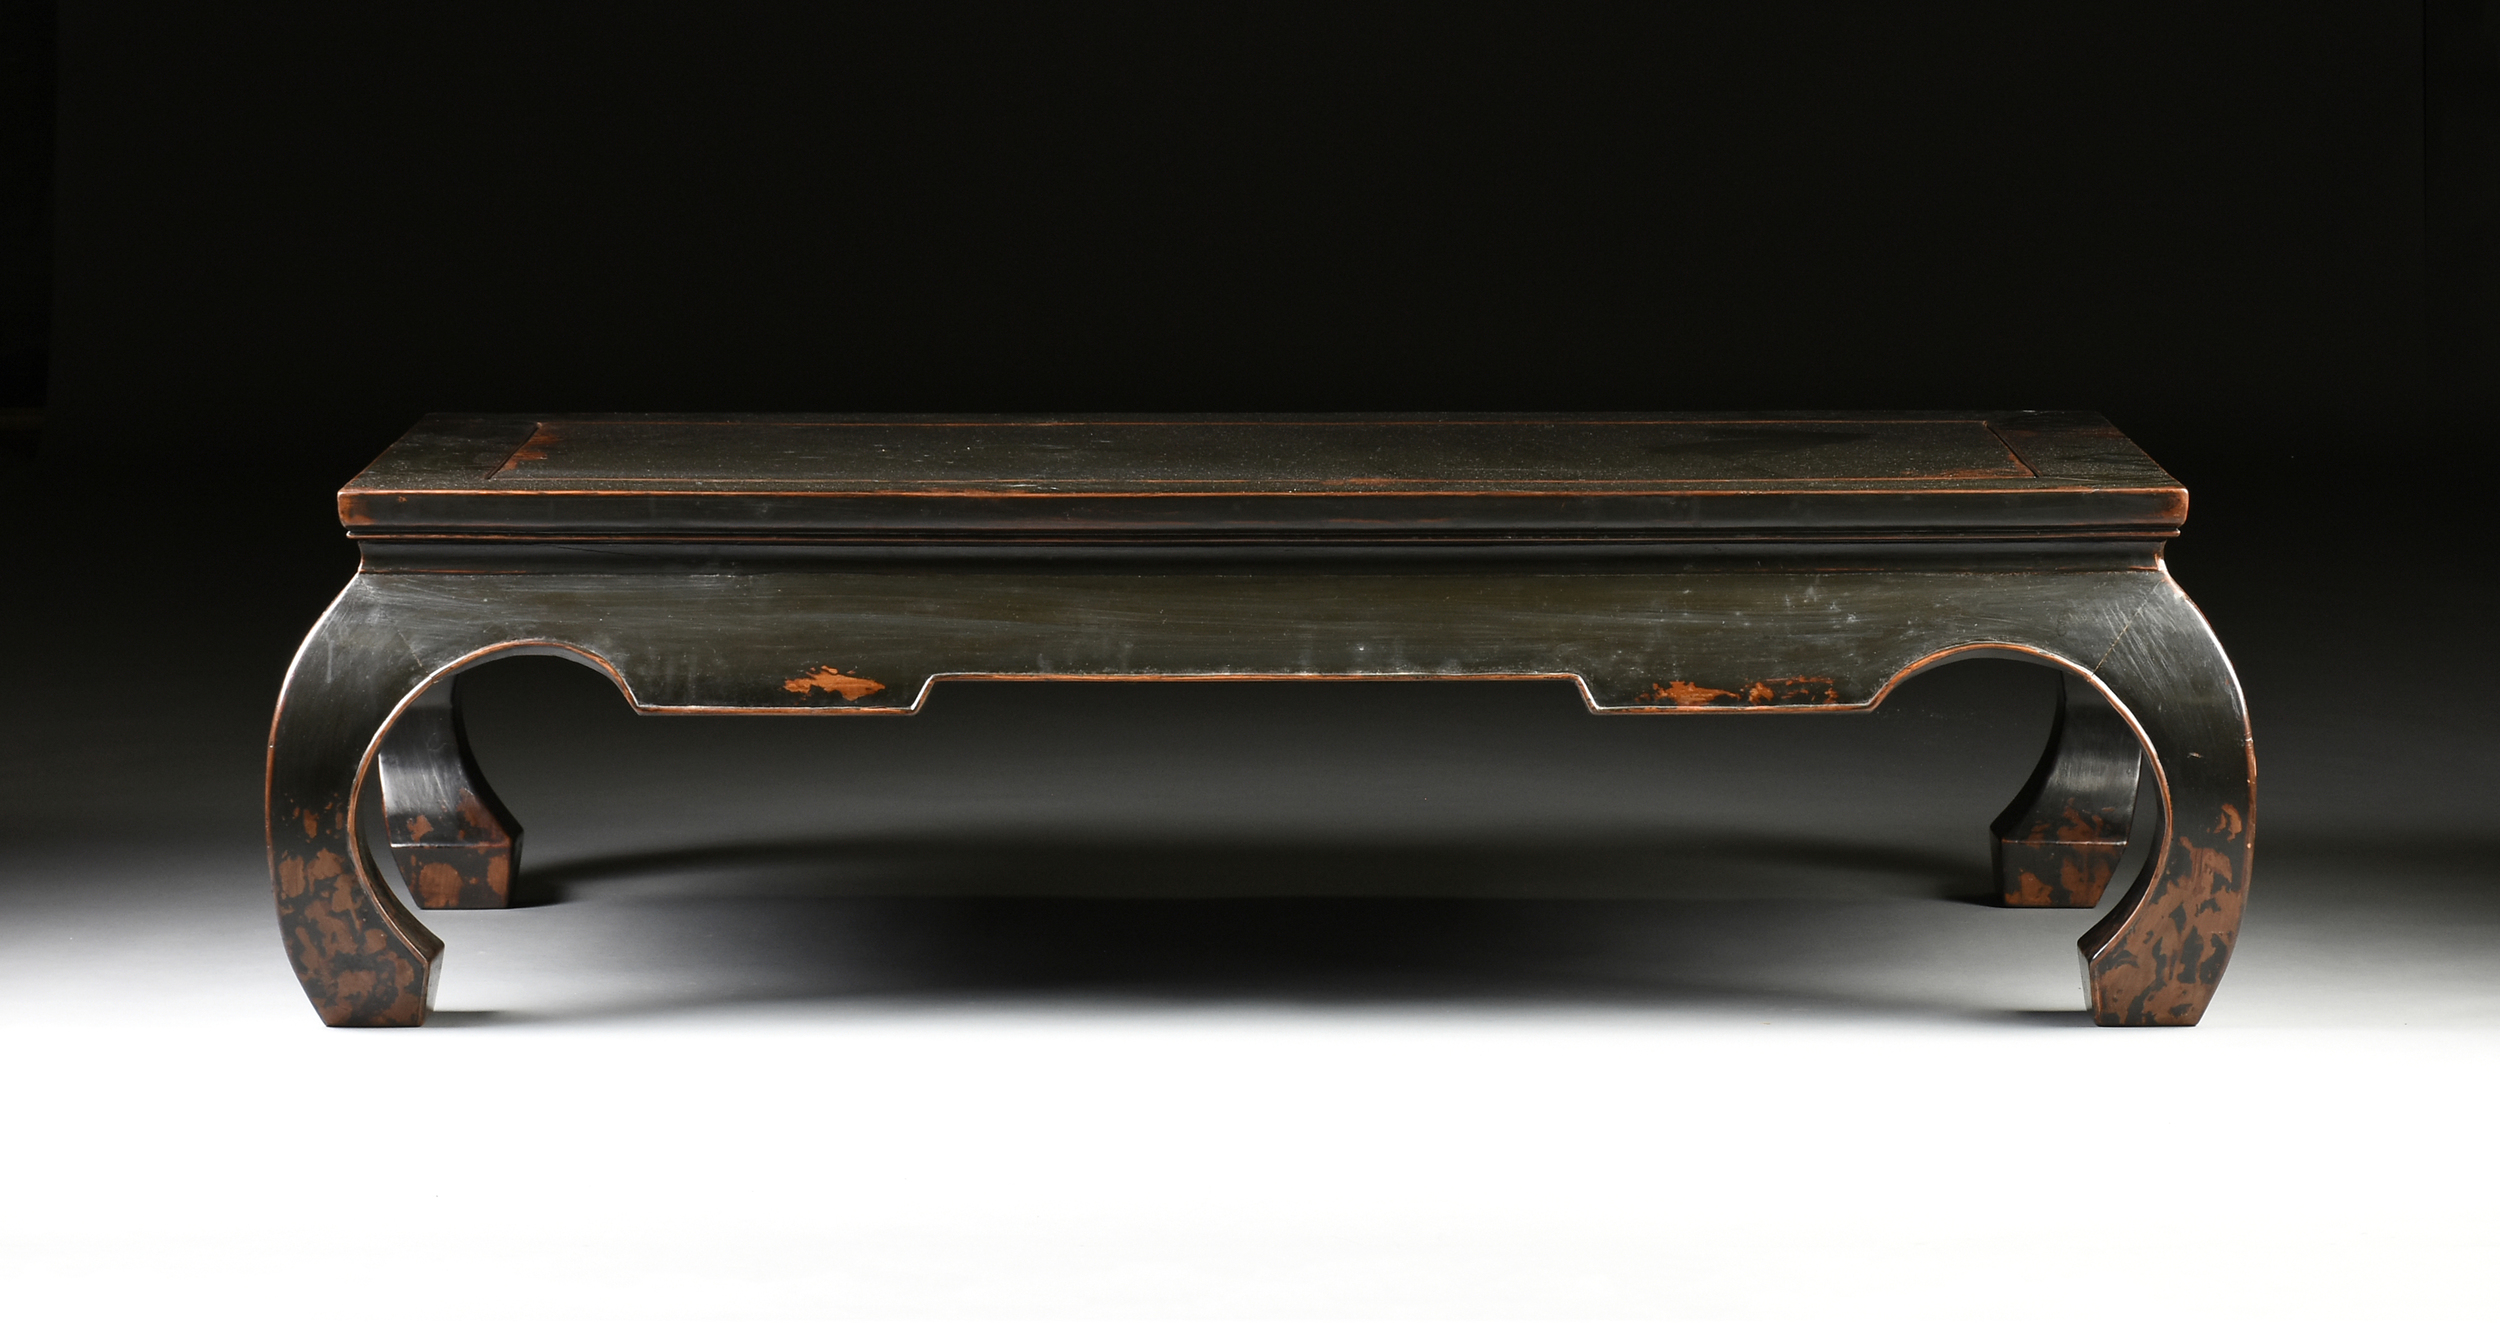 A CHINESE CHARCOAL BLACK LACQUERED WOOD COFFEE TABLE, MODERN, with a rectangular floating panel - Image 2 of 7